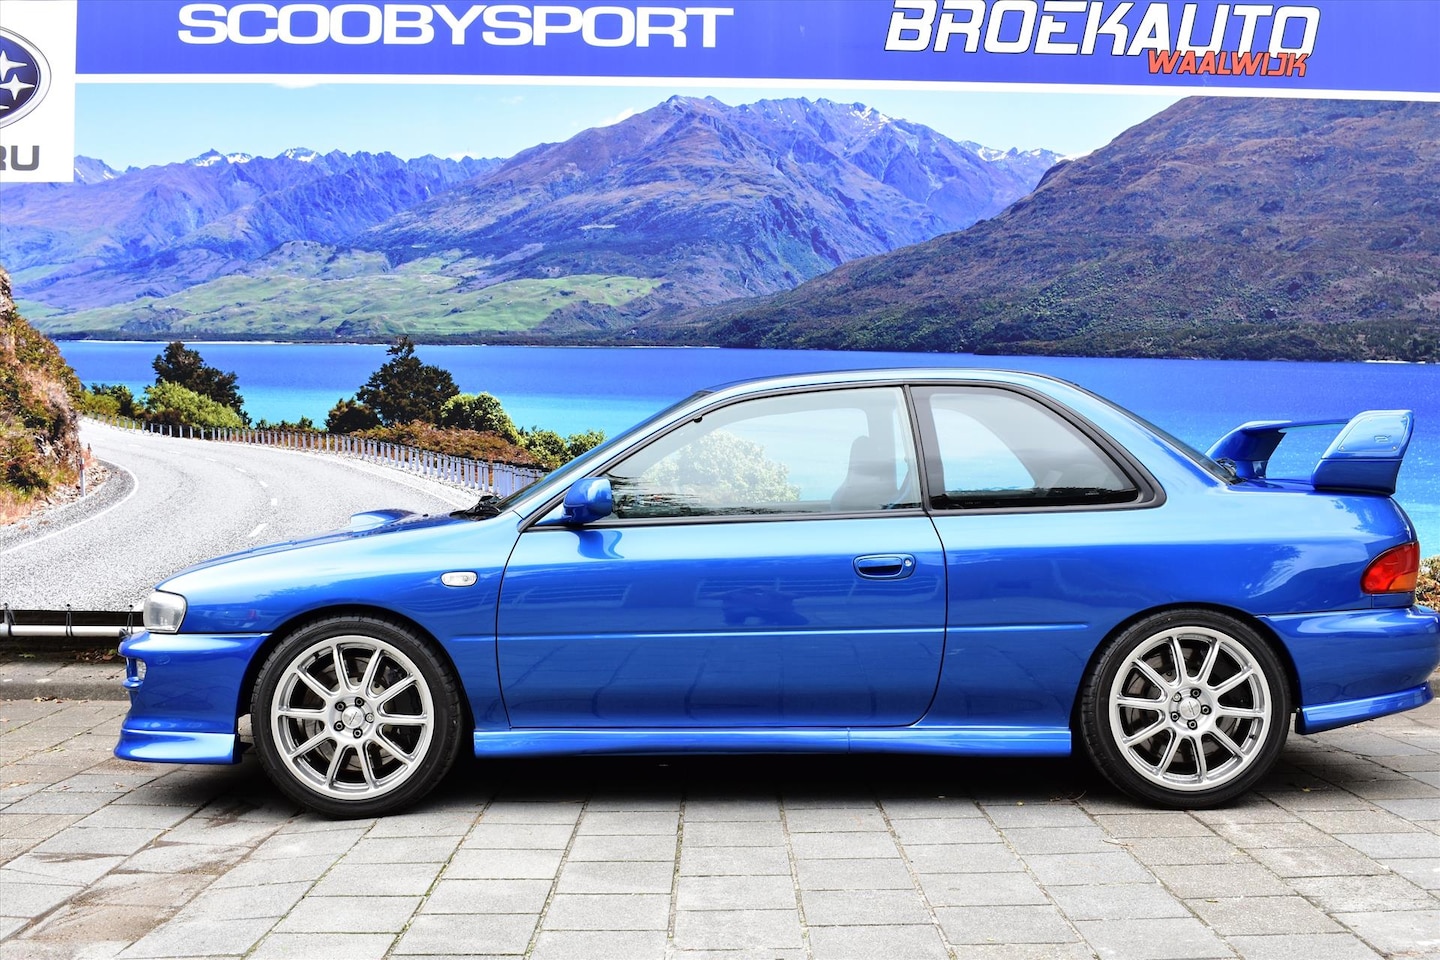 This rather lovely Subaru Impreza P1 could be yours for less than £20k